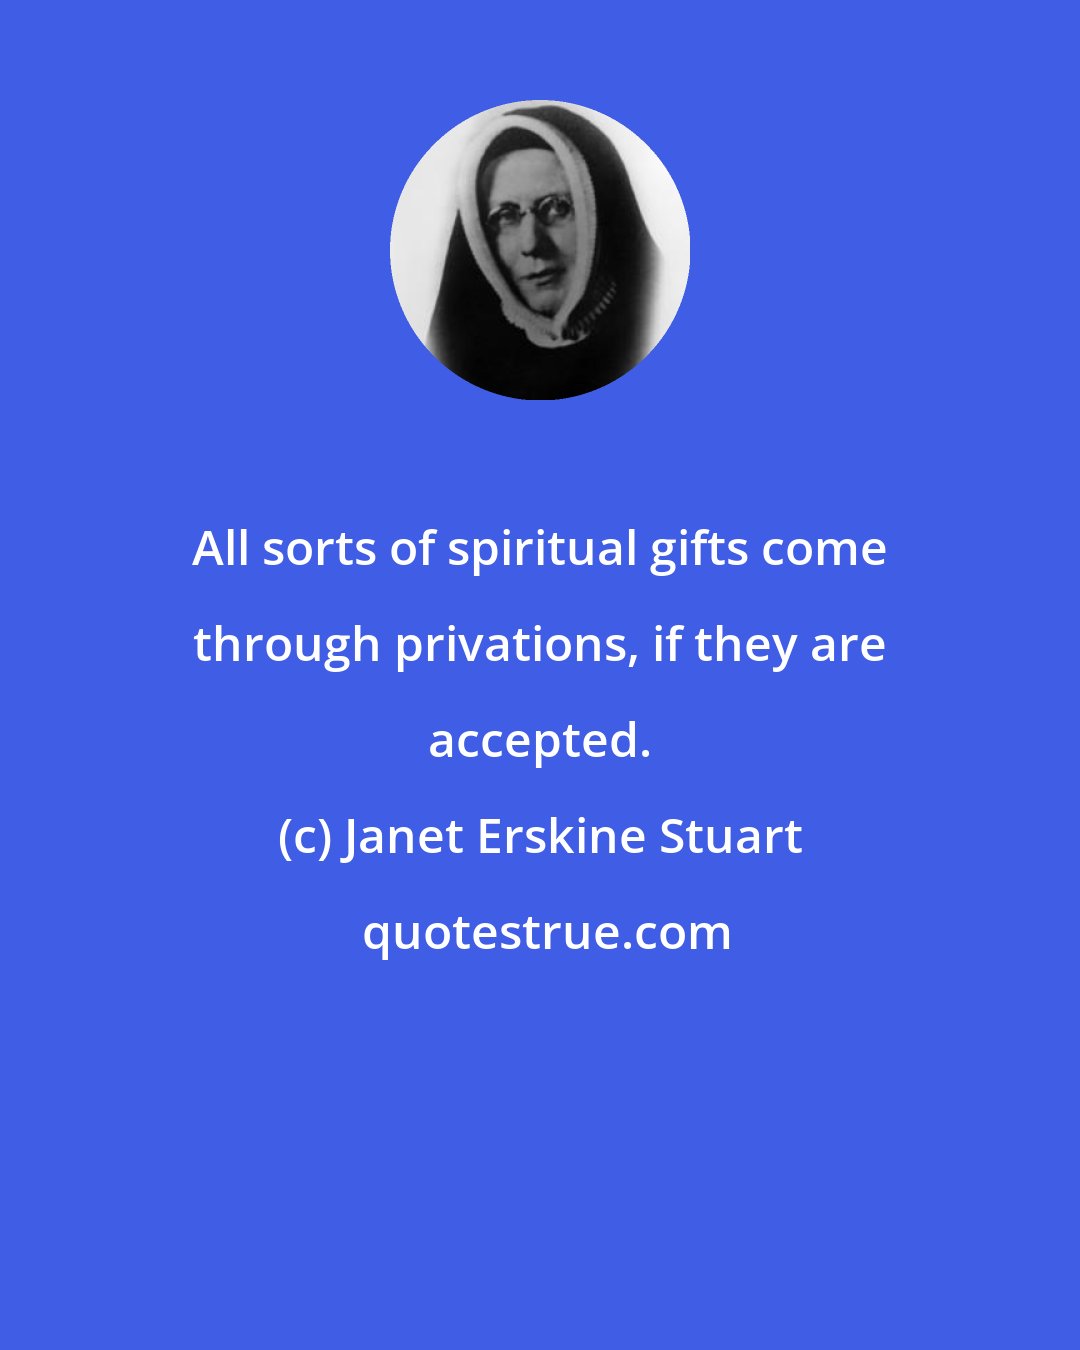 Janet Erskine Stuart: All sorts of spiritual gifts come through privations, if they are accepted.